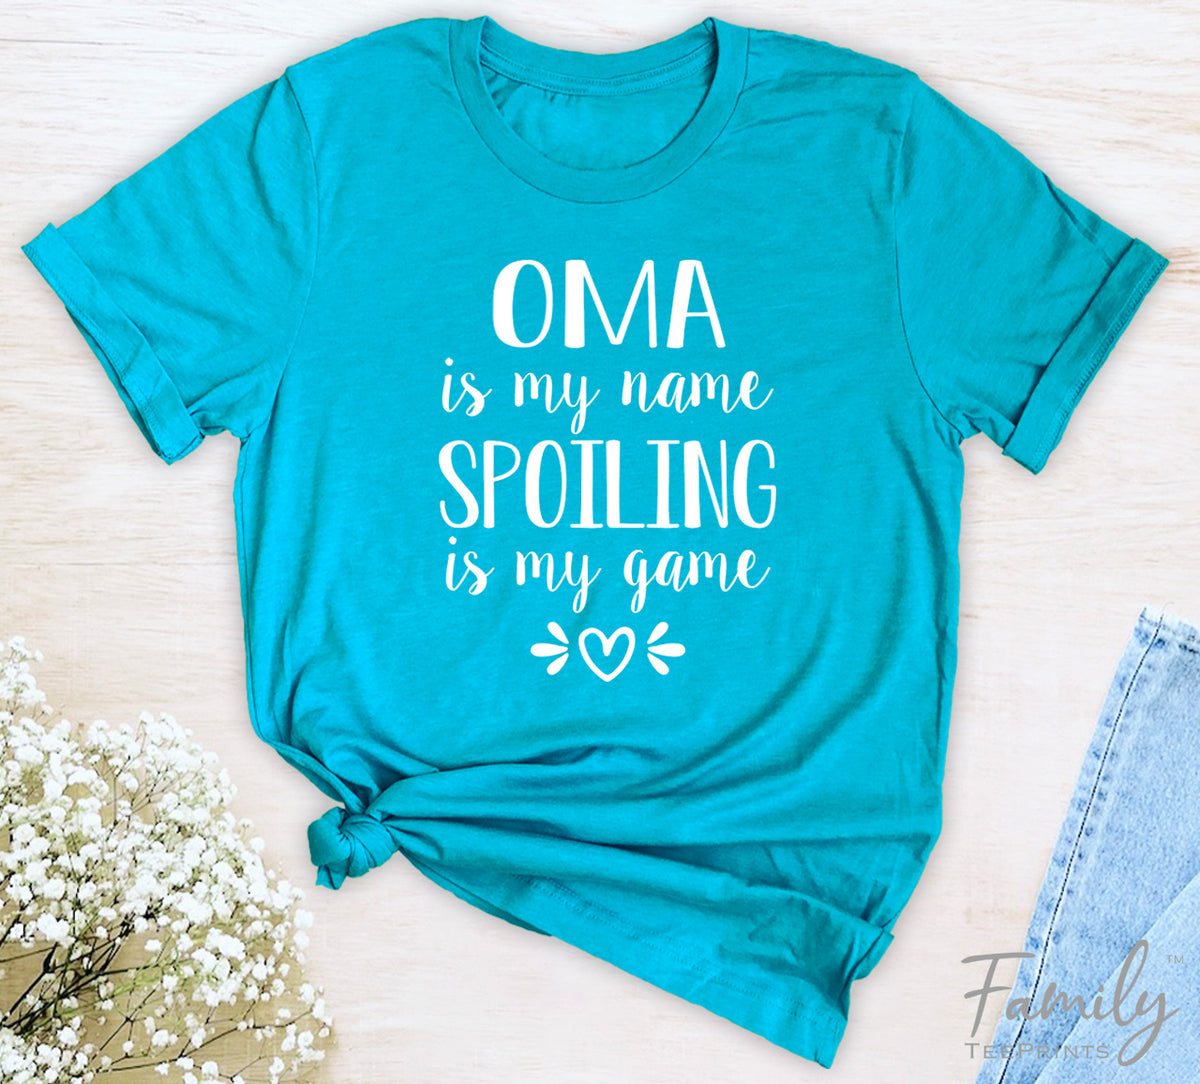 Oma Is My Name Spoiling Is My Game - Unisex T-shirt - Oma Shirt - Gift For Oma - familyteeprints